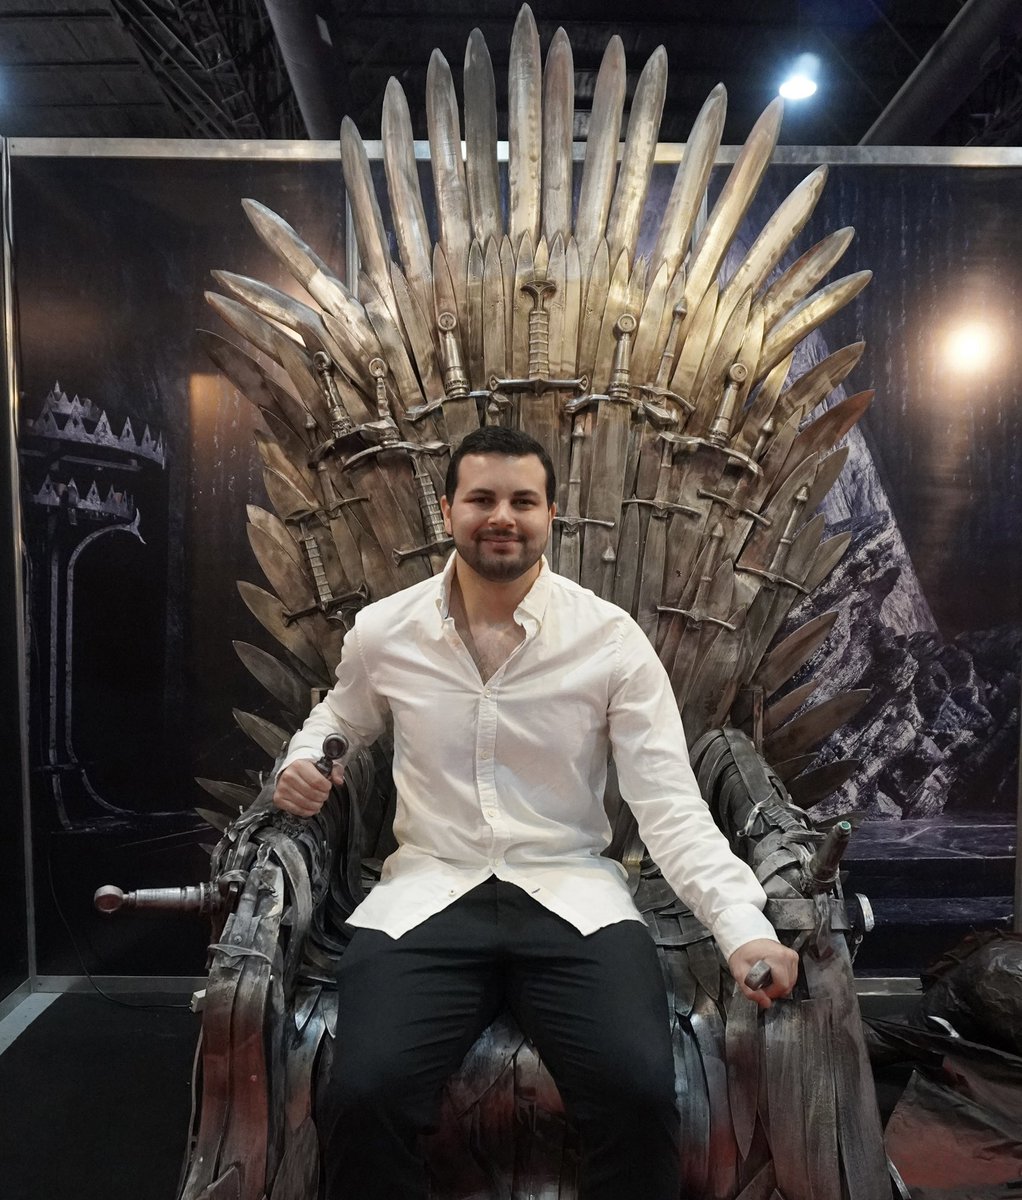 When you play the game of thrones, you win or you die. ⚔️

#gameofthrones #got #juegodetronos #ironthrone #king #rey #winteriscoming #hbo